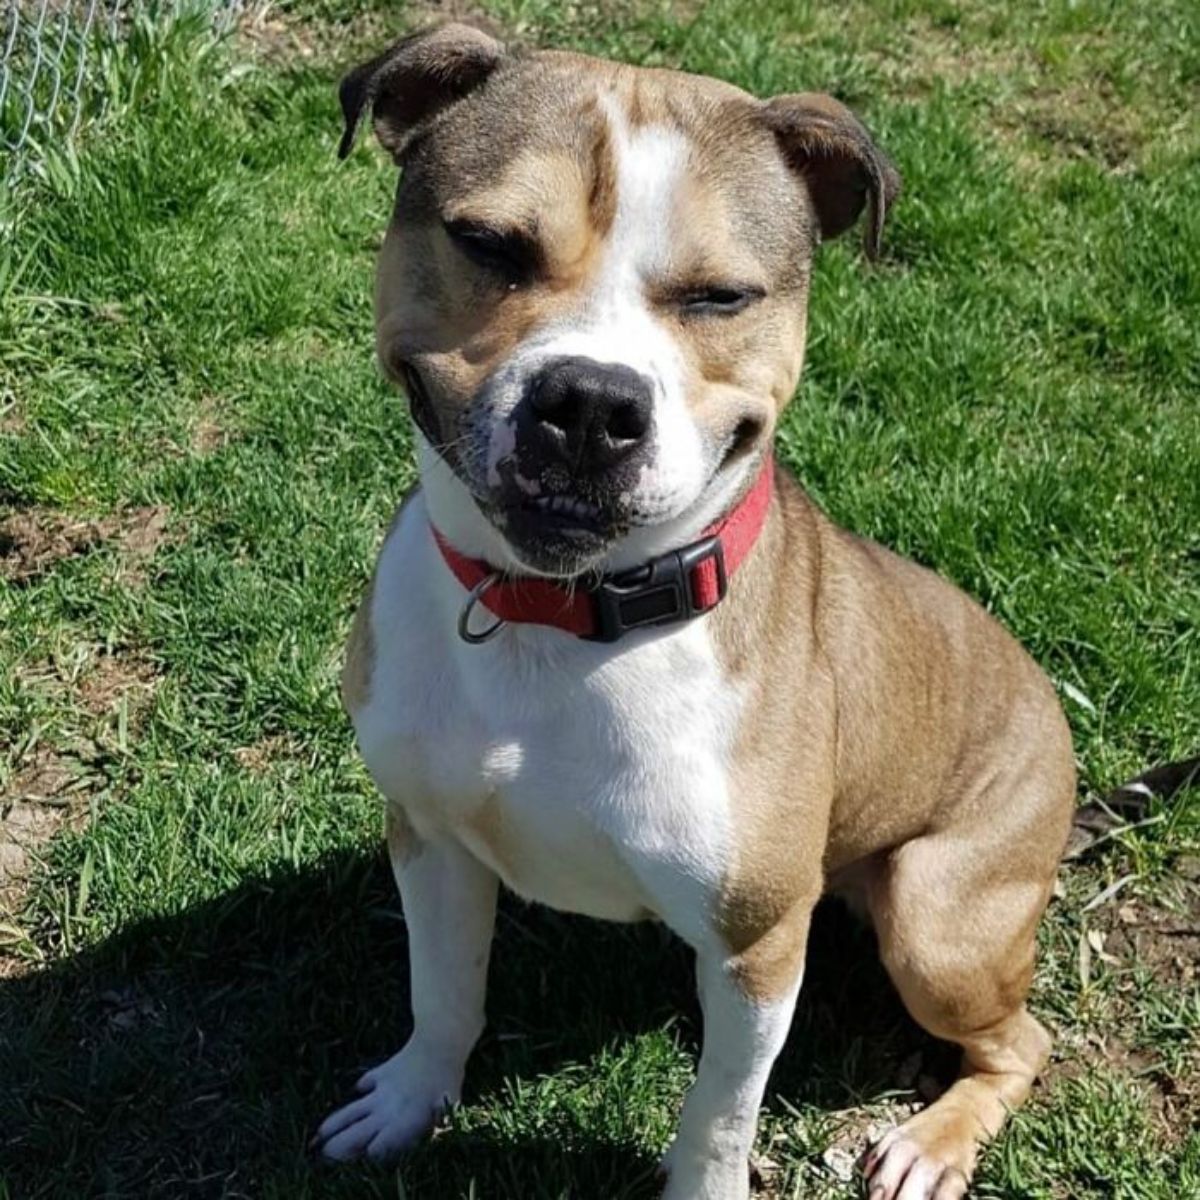 brown and white pit bull wearing a red collar sitting on grass